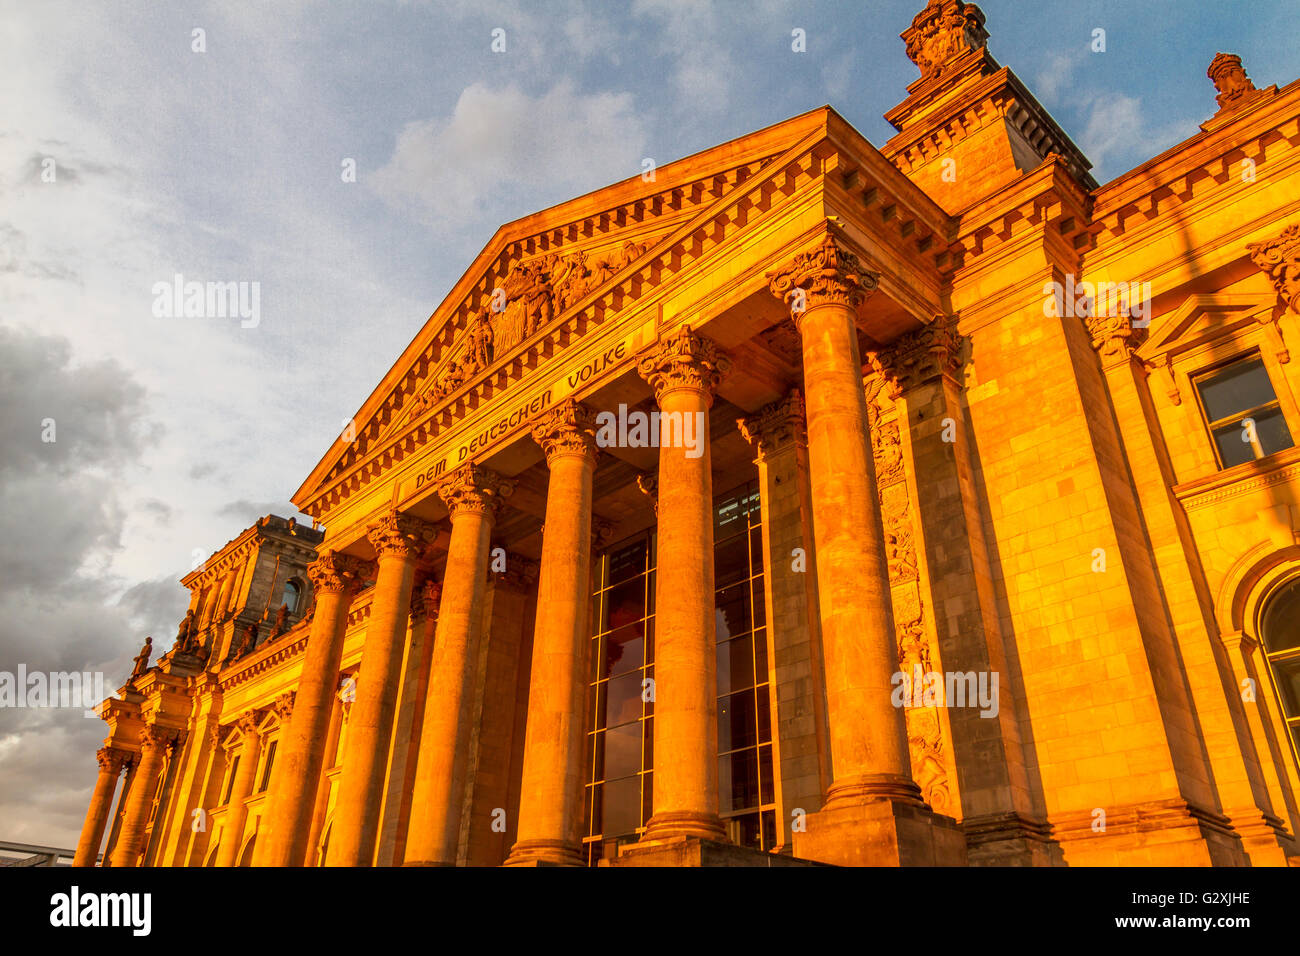 The exterior of the Reichstag building home of the German Parliament ,glowing in the setting sun , Berlin. Germany Stock Photo